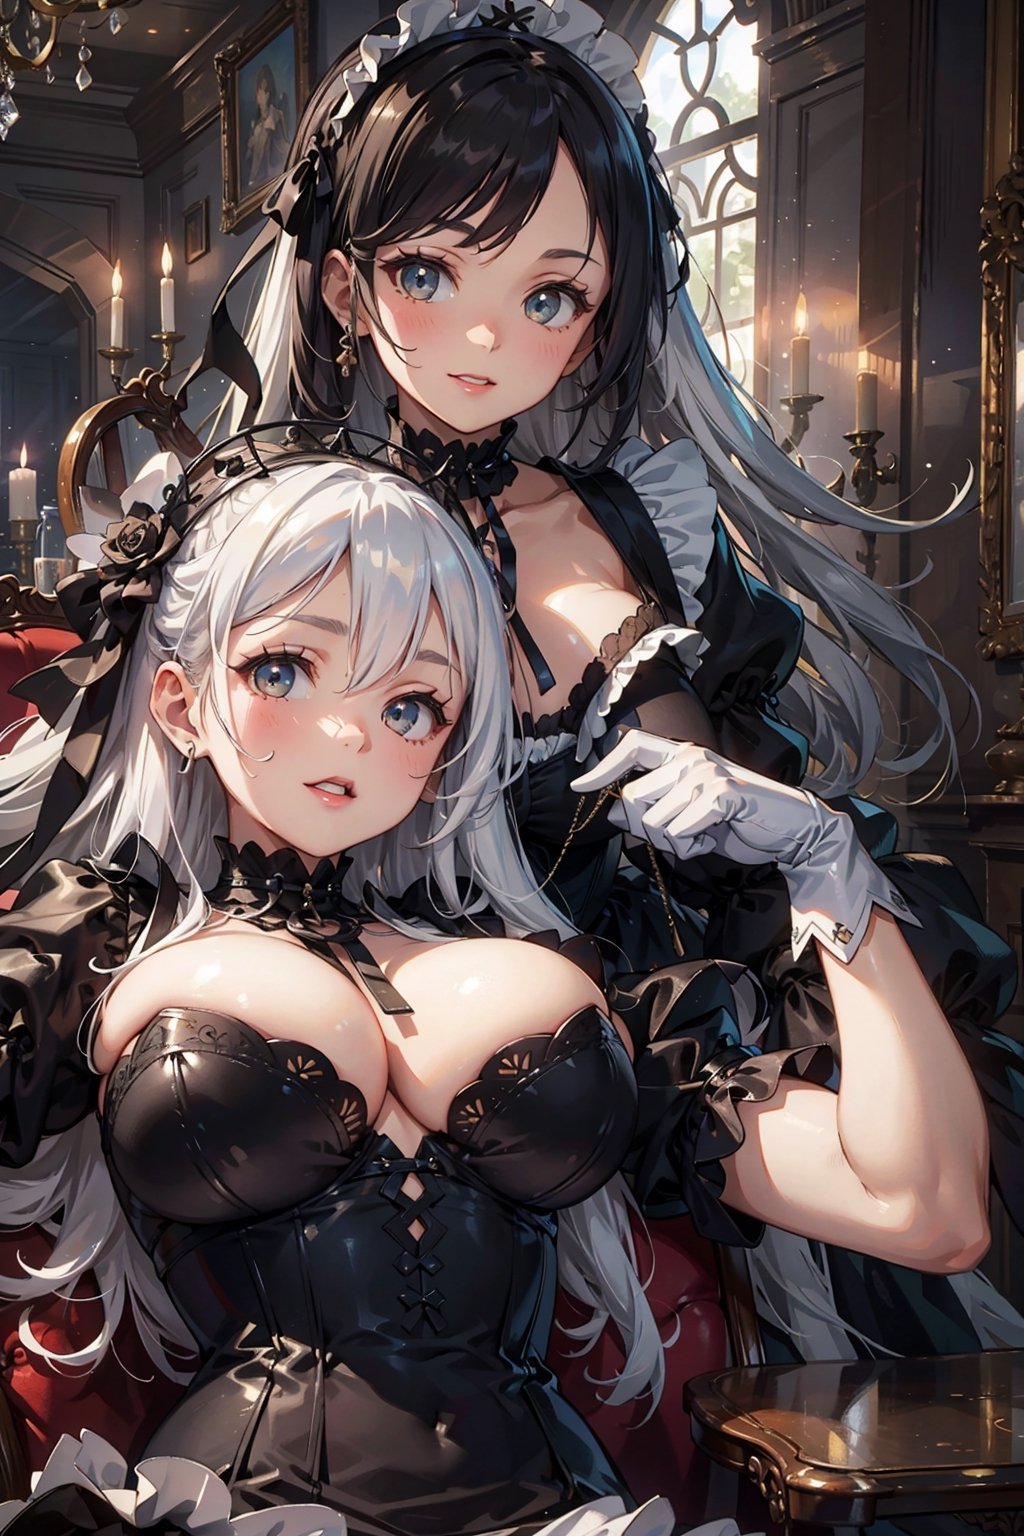 Imagine this. Upscaled, (((both with white hair))), 2girls clear skin, (Masterpiece, best quality, high resolution, highly detailed), Indoors detailed background, perfect lighting. (Hands:1.1), better_hands, gloved hands, better_hands.
Corny Katrina maid with white hair smiling and teasing you with an evil twin. Maid, black dress (dress:1.2), heavy duty working rubber gloves, puffy skirt, long skirt, puffy sleeves, long sleeves, Juliet sleeves, buttoned blouse with Victorian neck, tight corset, (huge breasts:1.1), breastfeeding chest. Indoors, (renaissance, vintage:1.2), ornate walls, 
By Paracosmos. 
,nodf_lora,LatexConcept